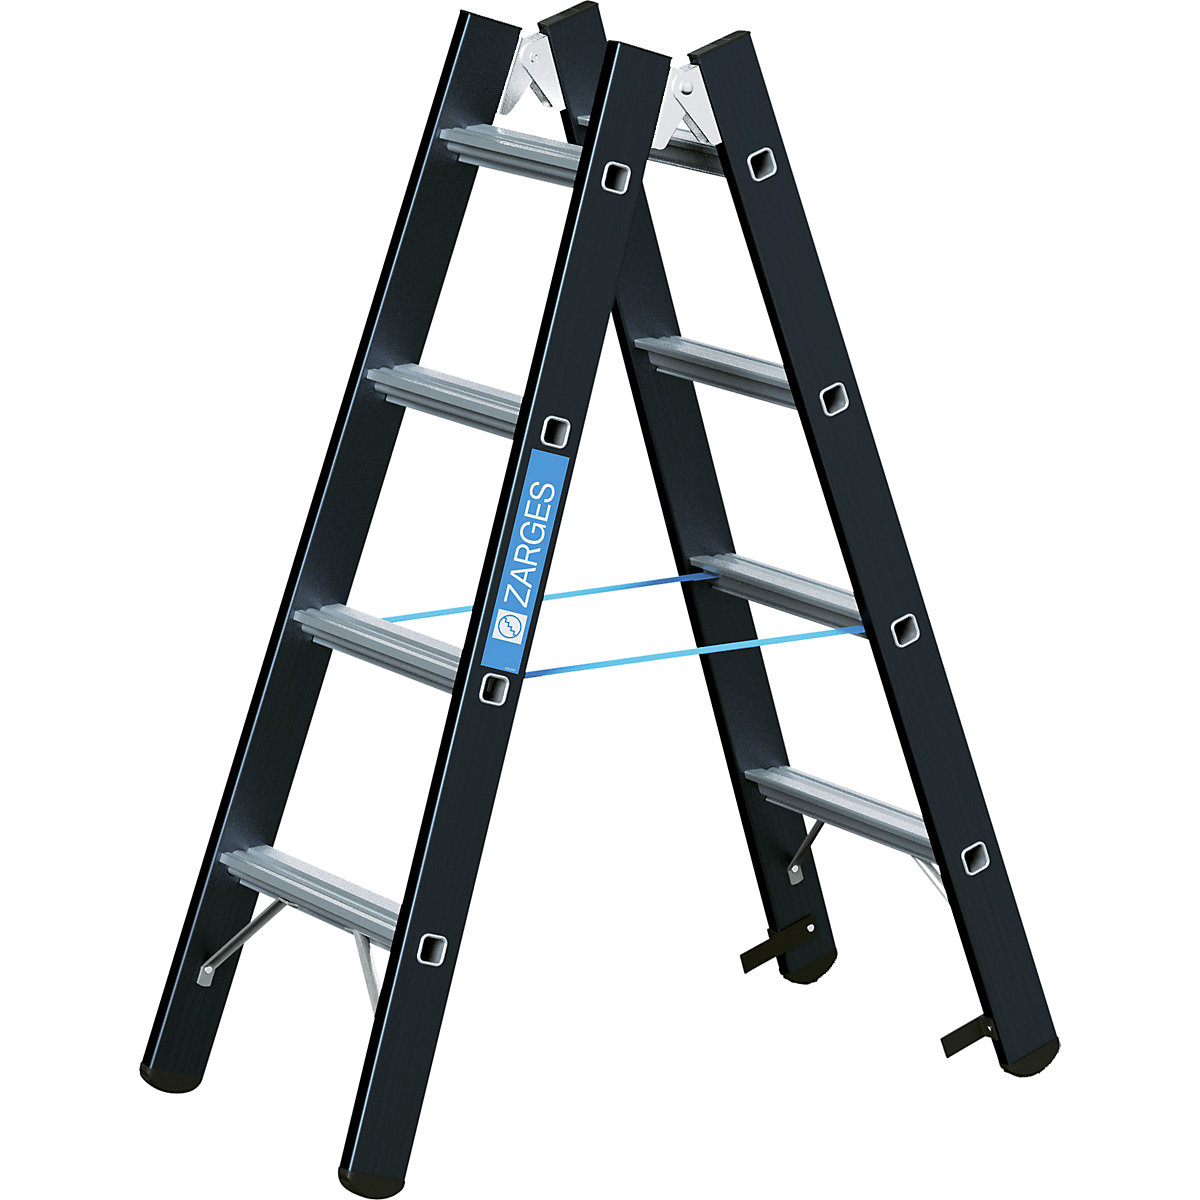 Heavy duty step ladder - ZARGES